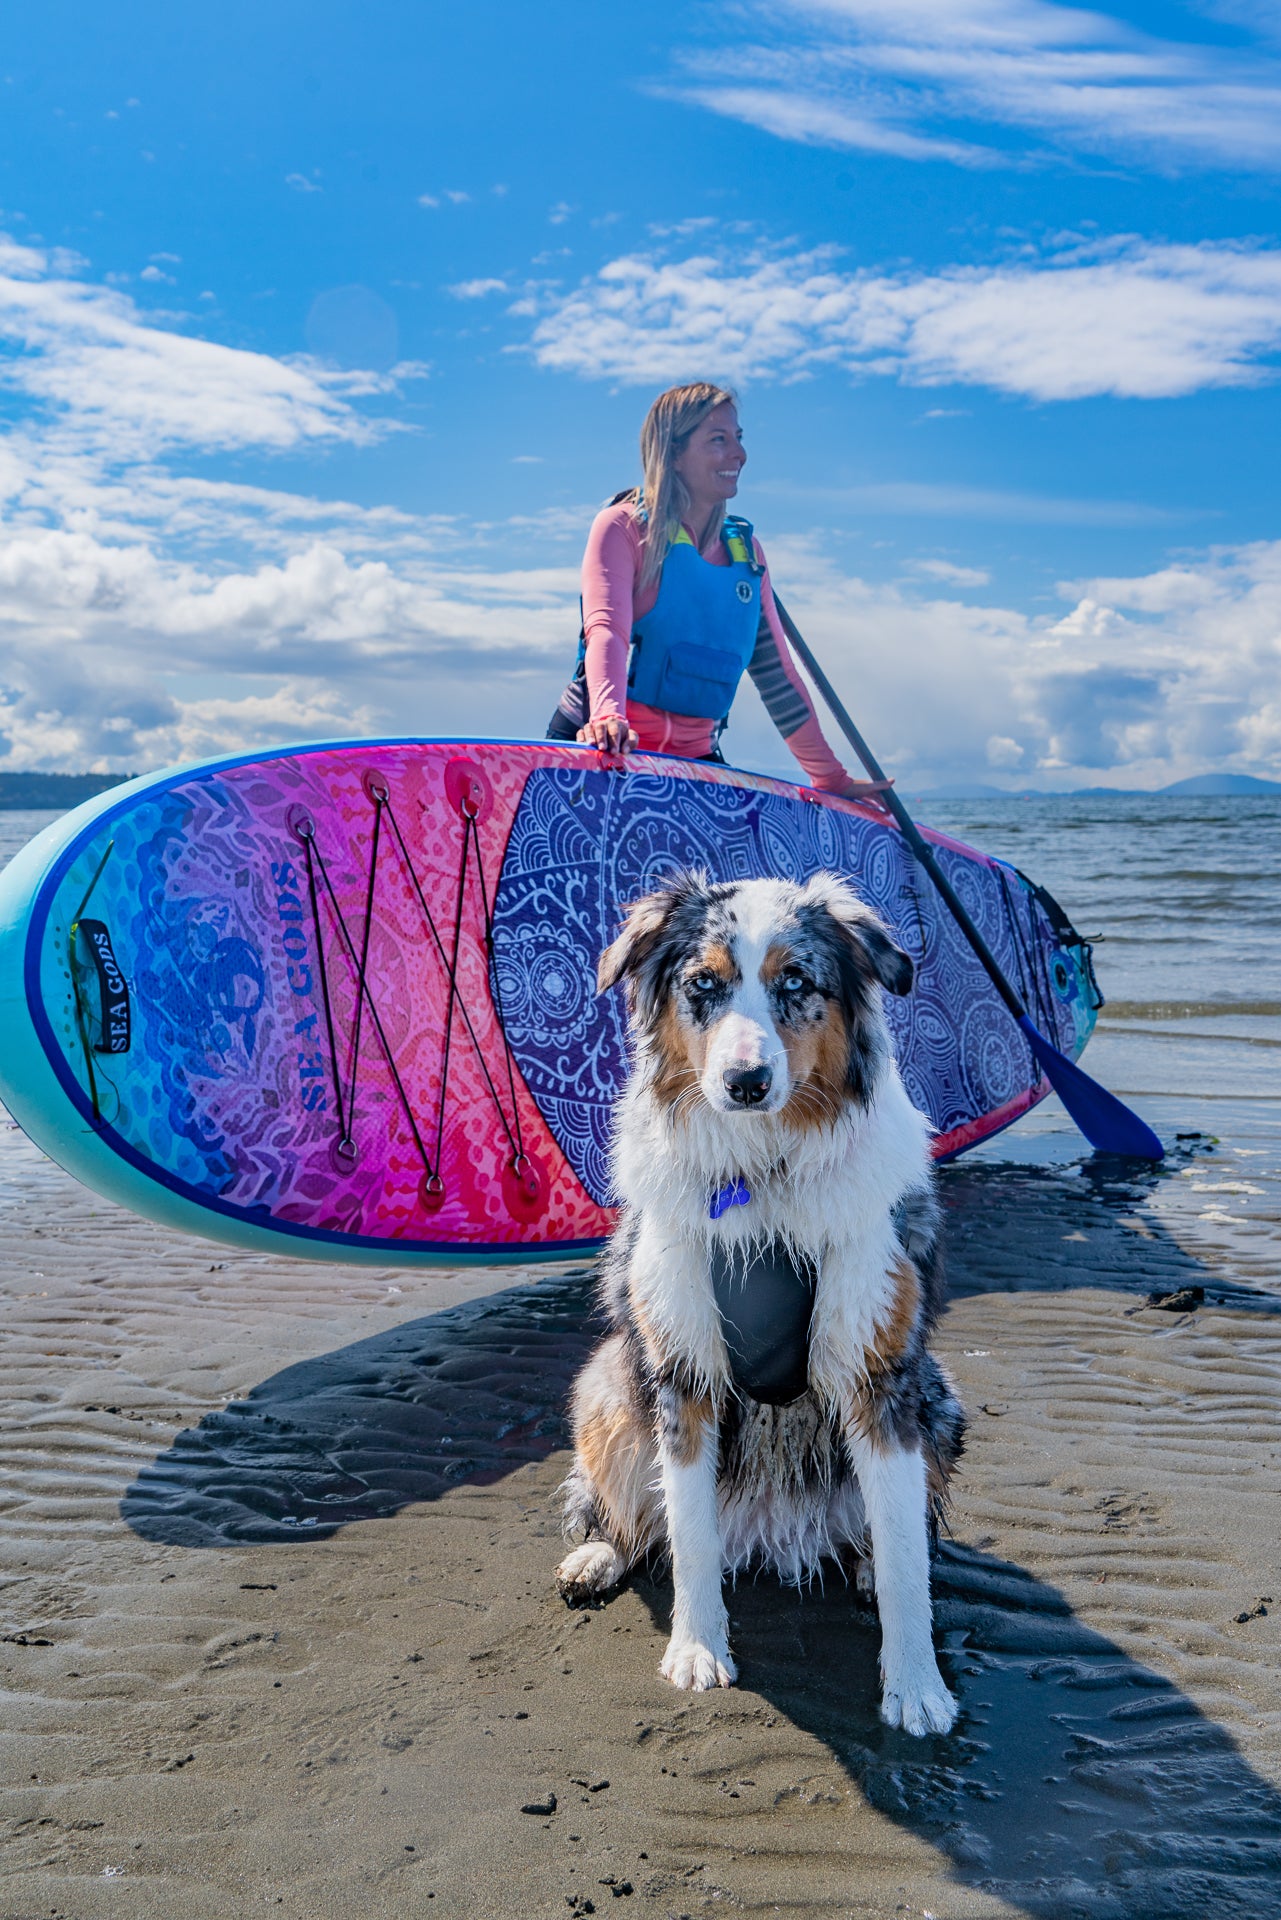 Sea Gods stand up paddleboards found paddling with a dog on an ocean beach